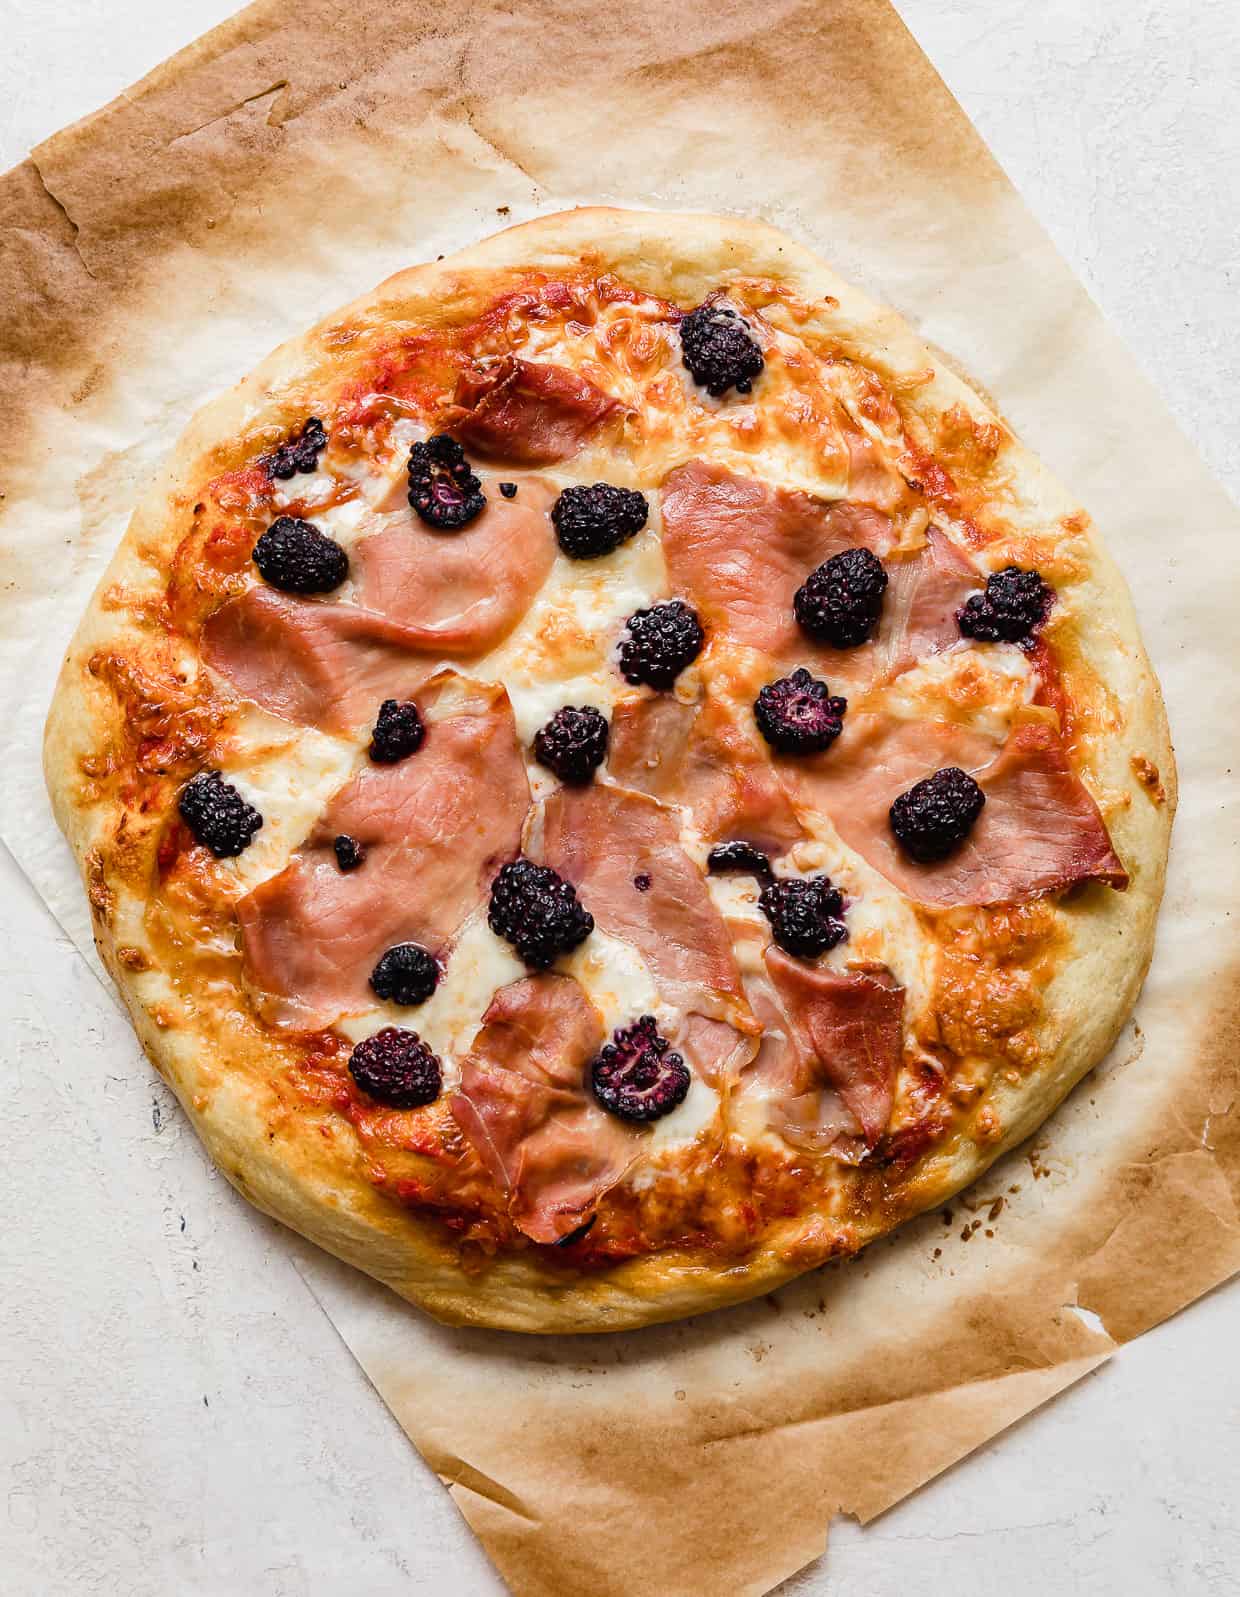 A baked blackberries pizza topped with prosciutto, basil, and blackberries.